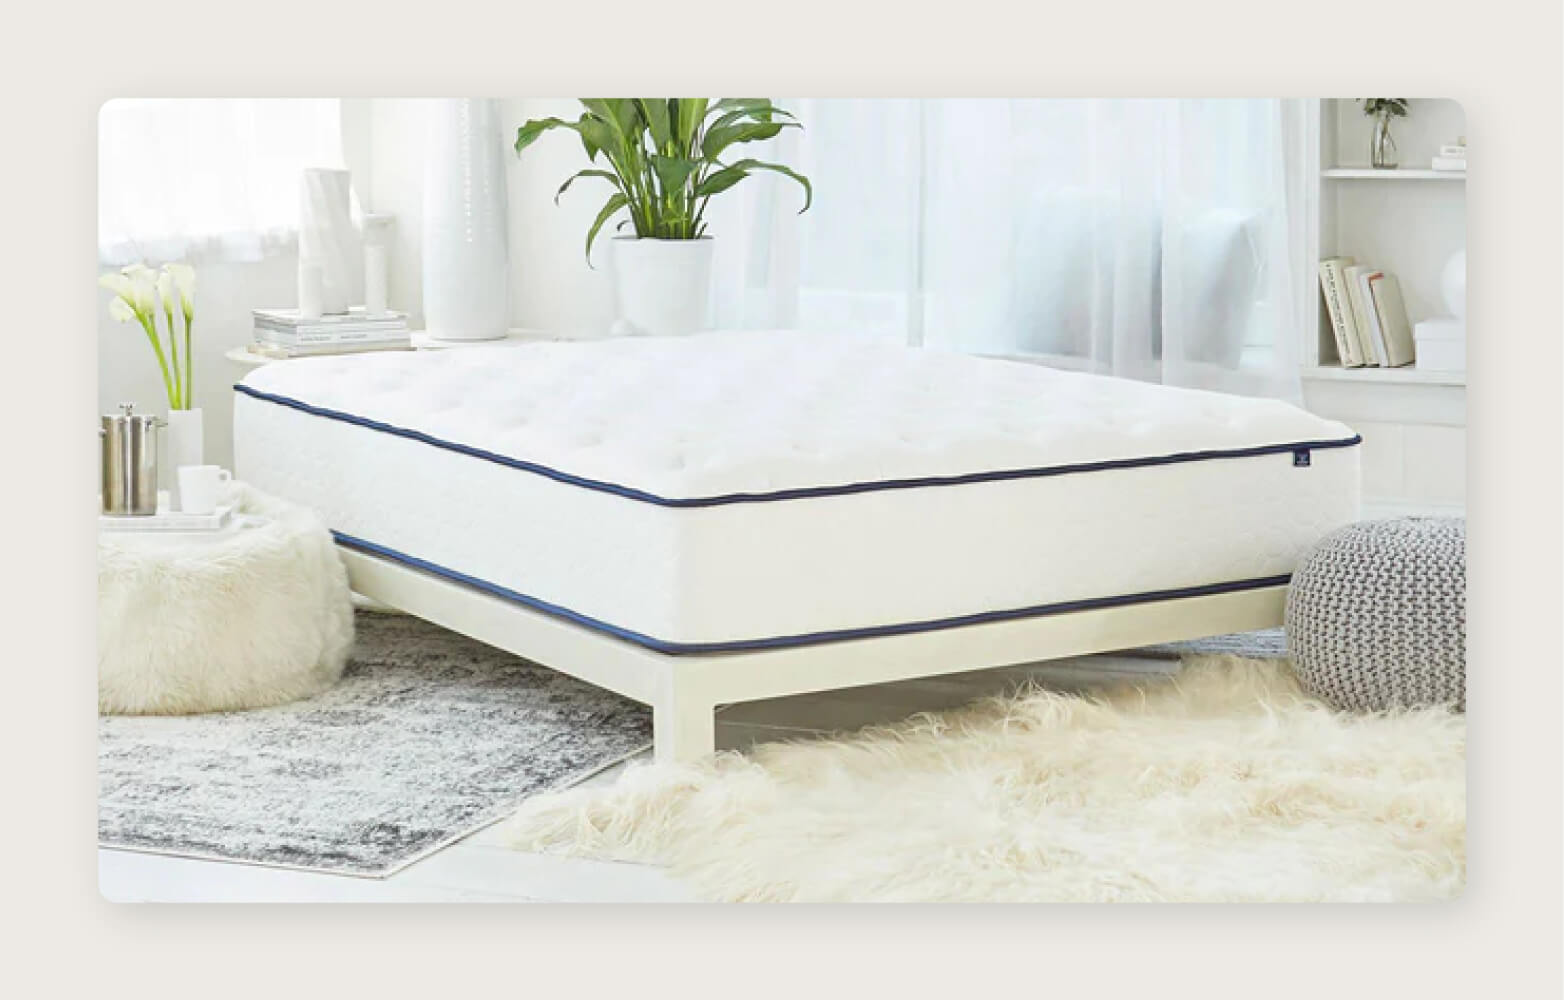 A WinkBeds GravityLux mattress sits on a white platform bed frame in a bright airy bedroom.